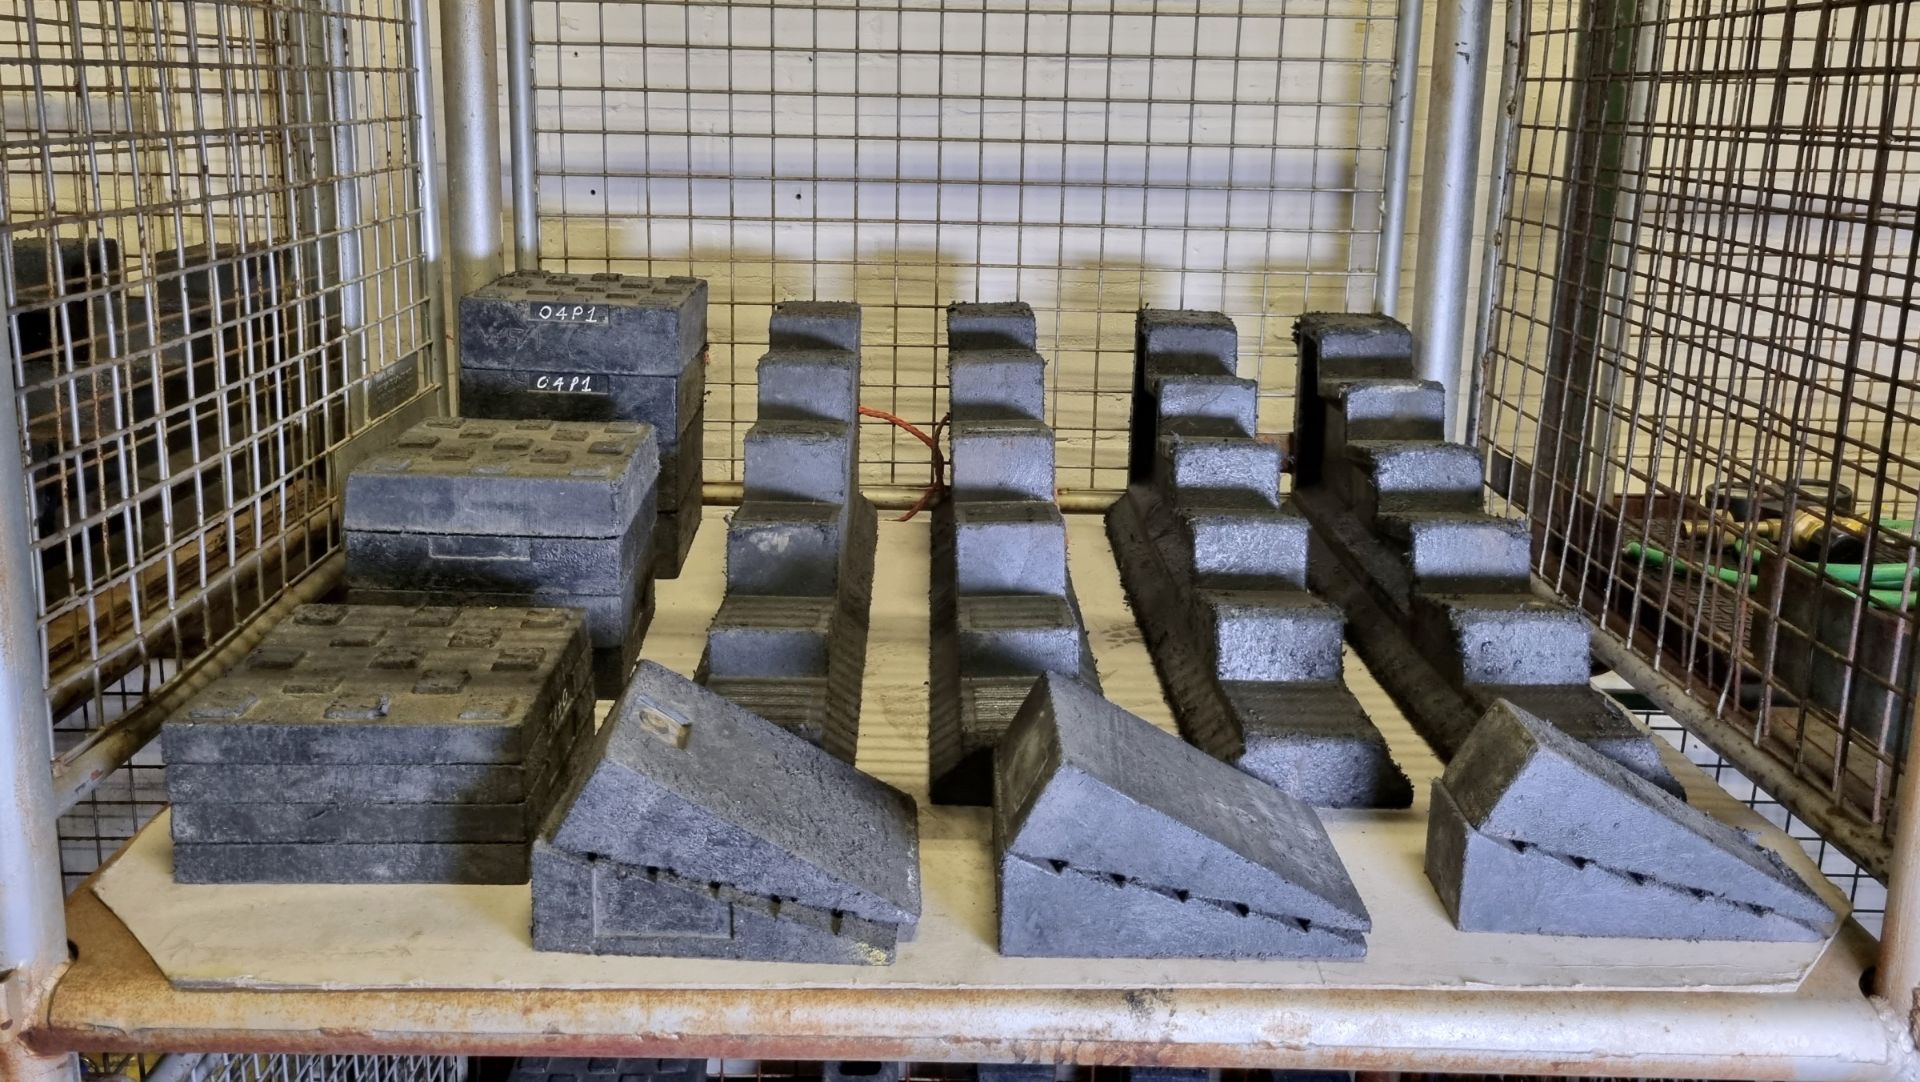 Chocks, blocks, safety wedges and bases